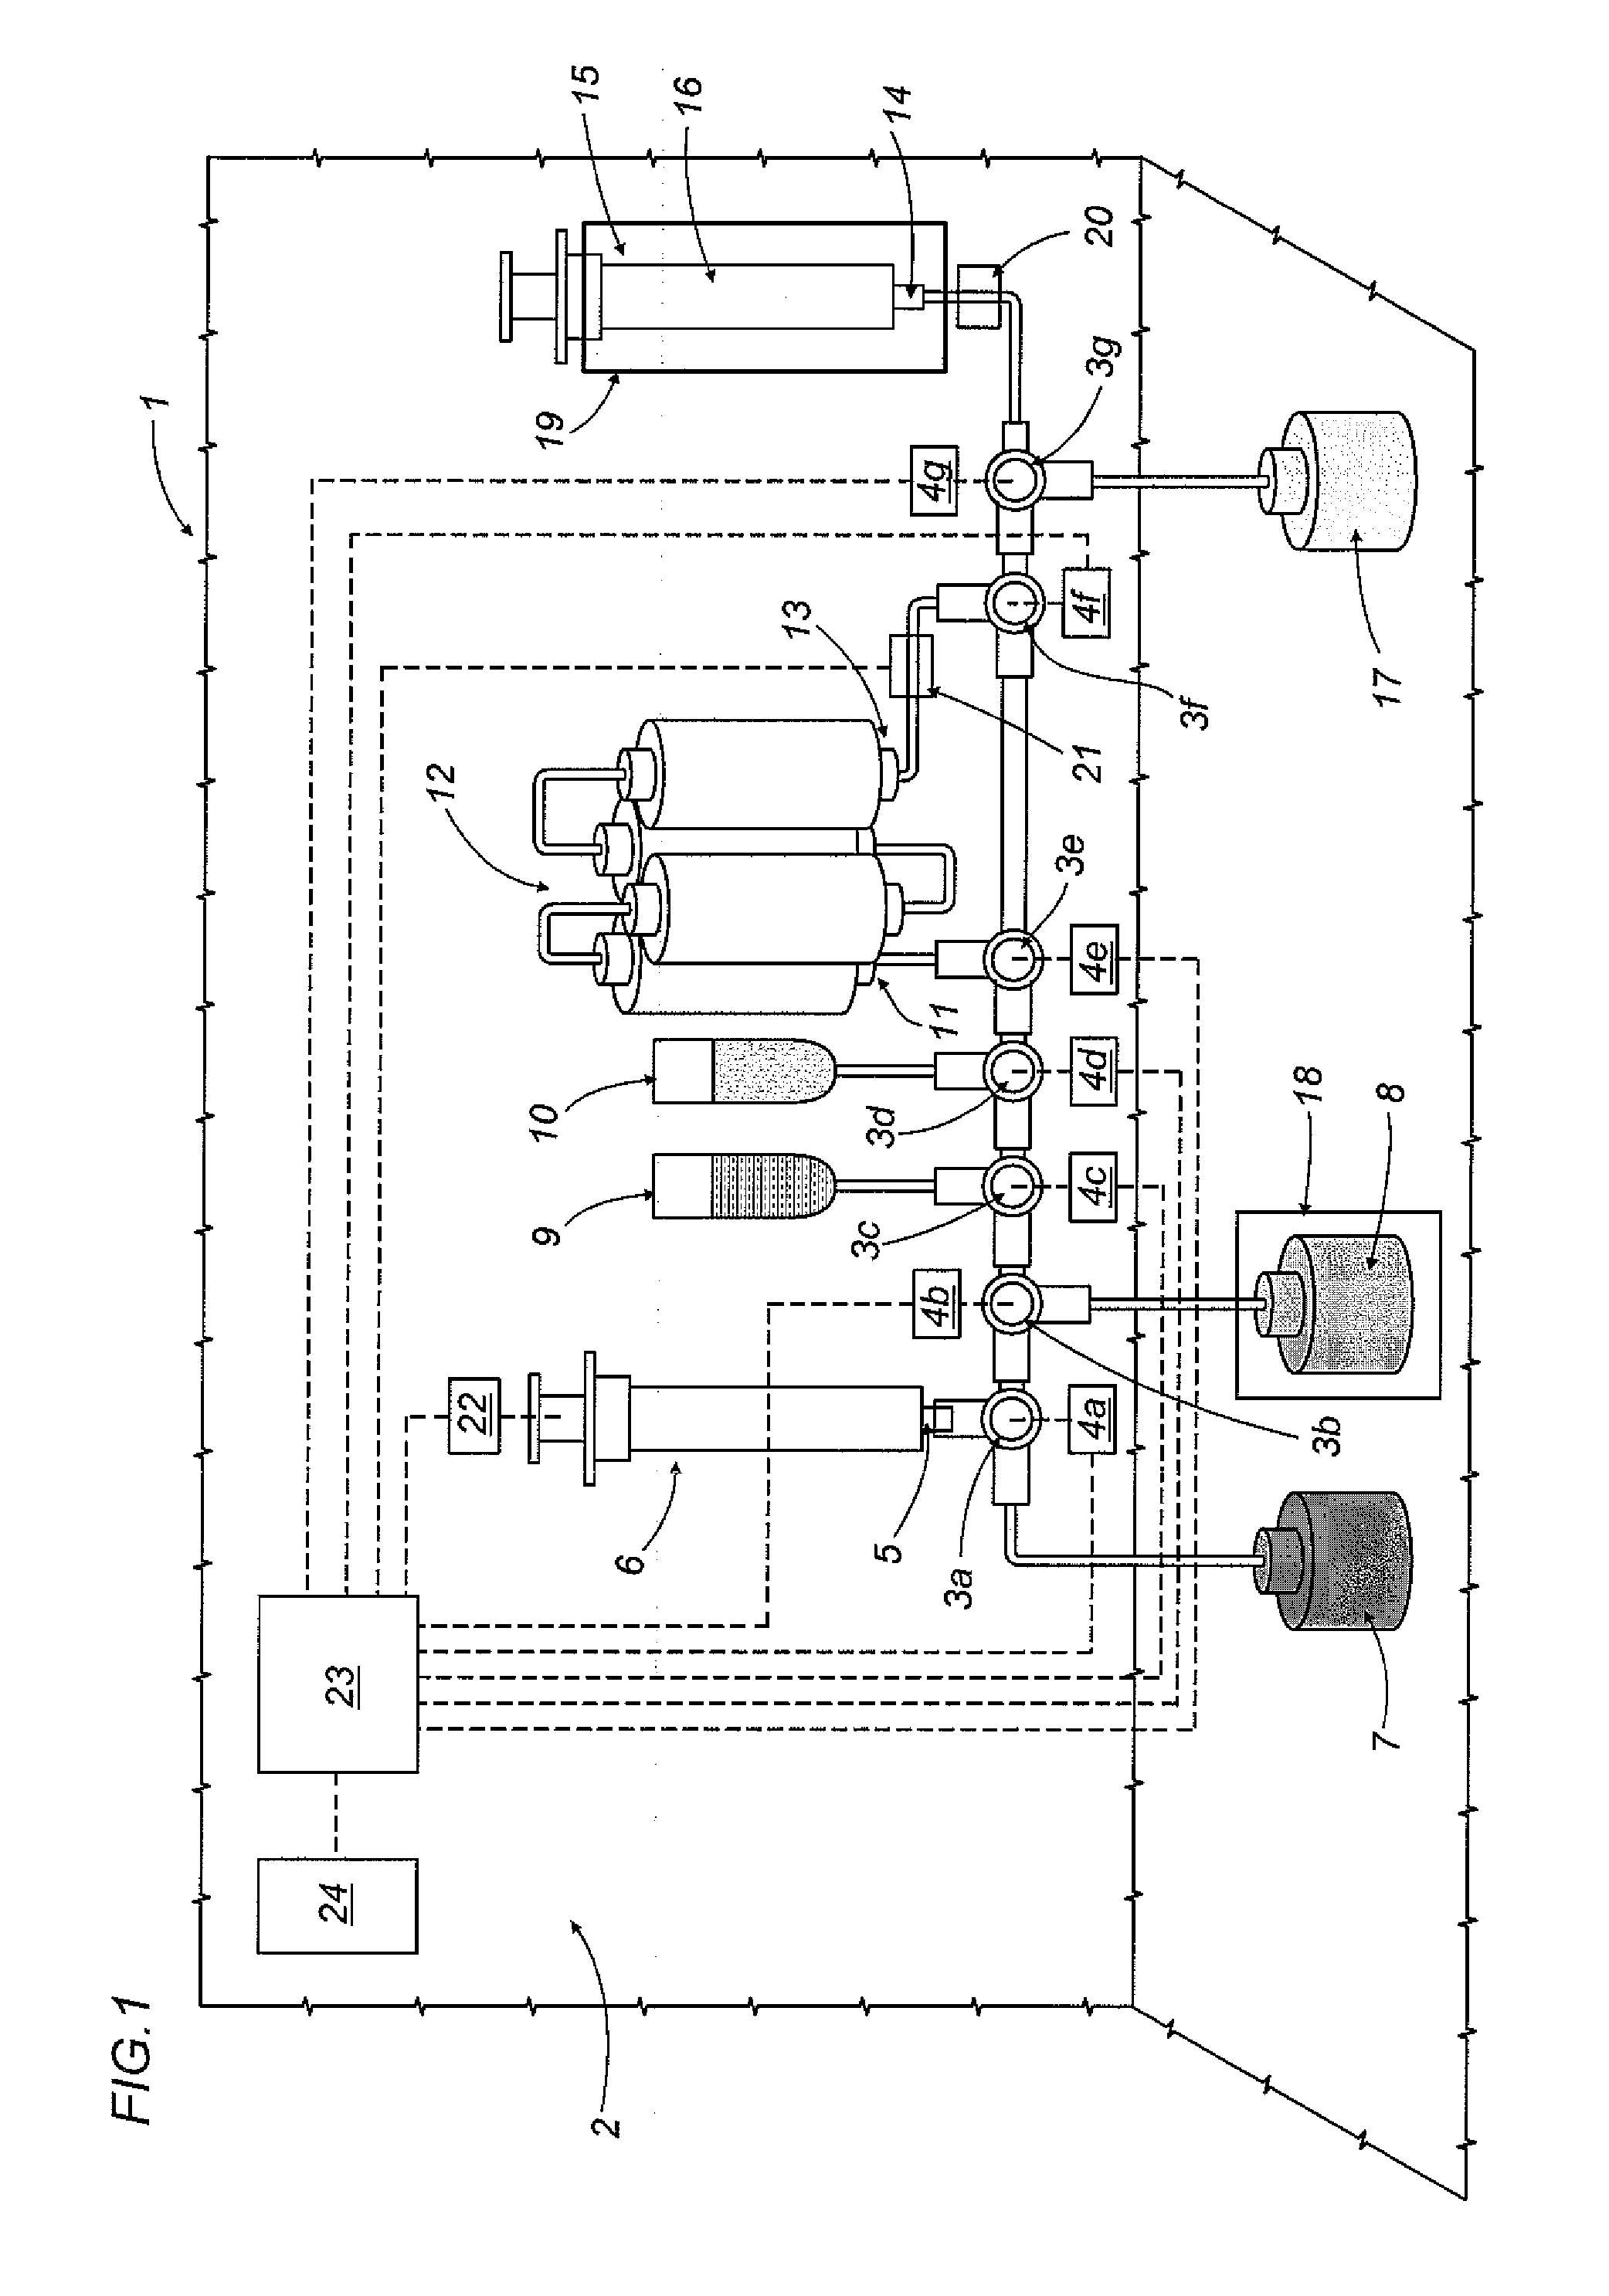 Apparatus and method for preparing medicines containing radioactive substances